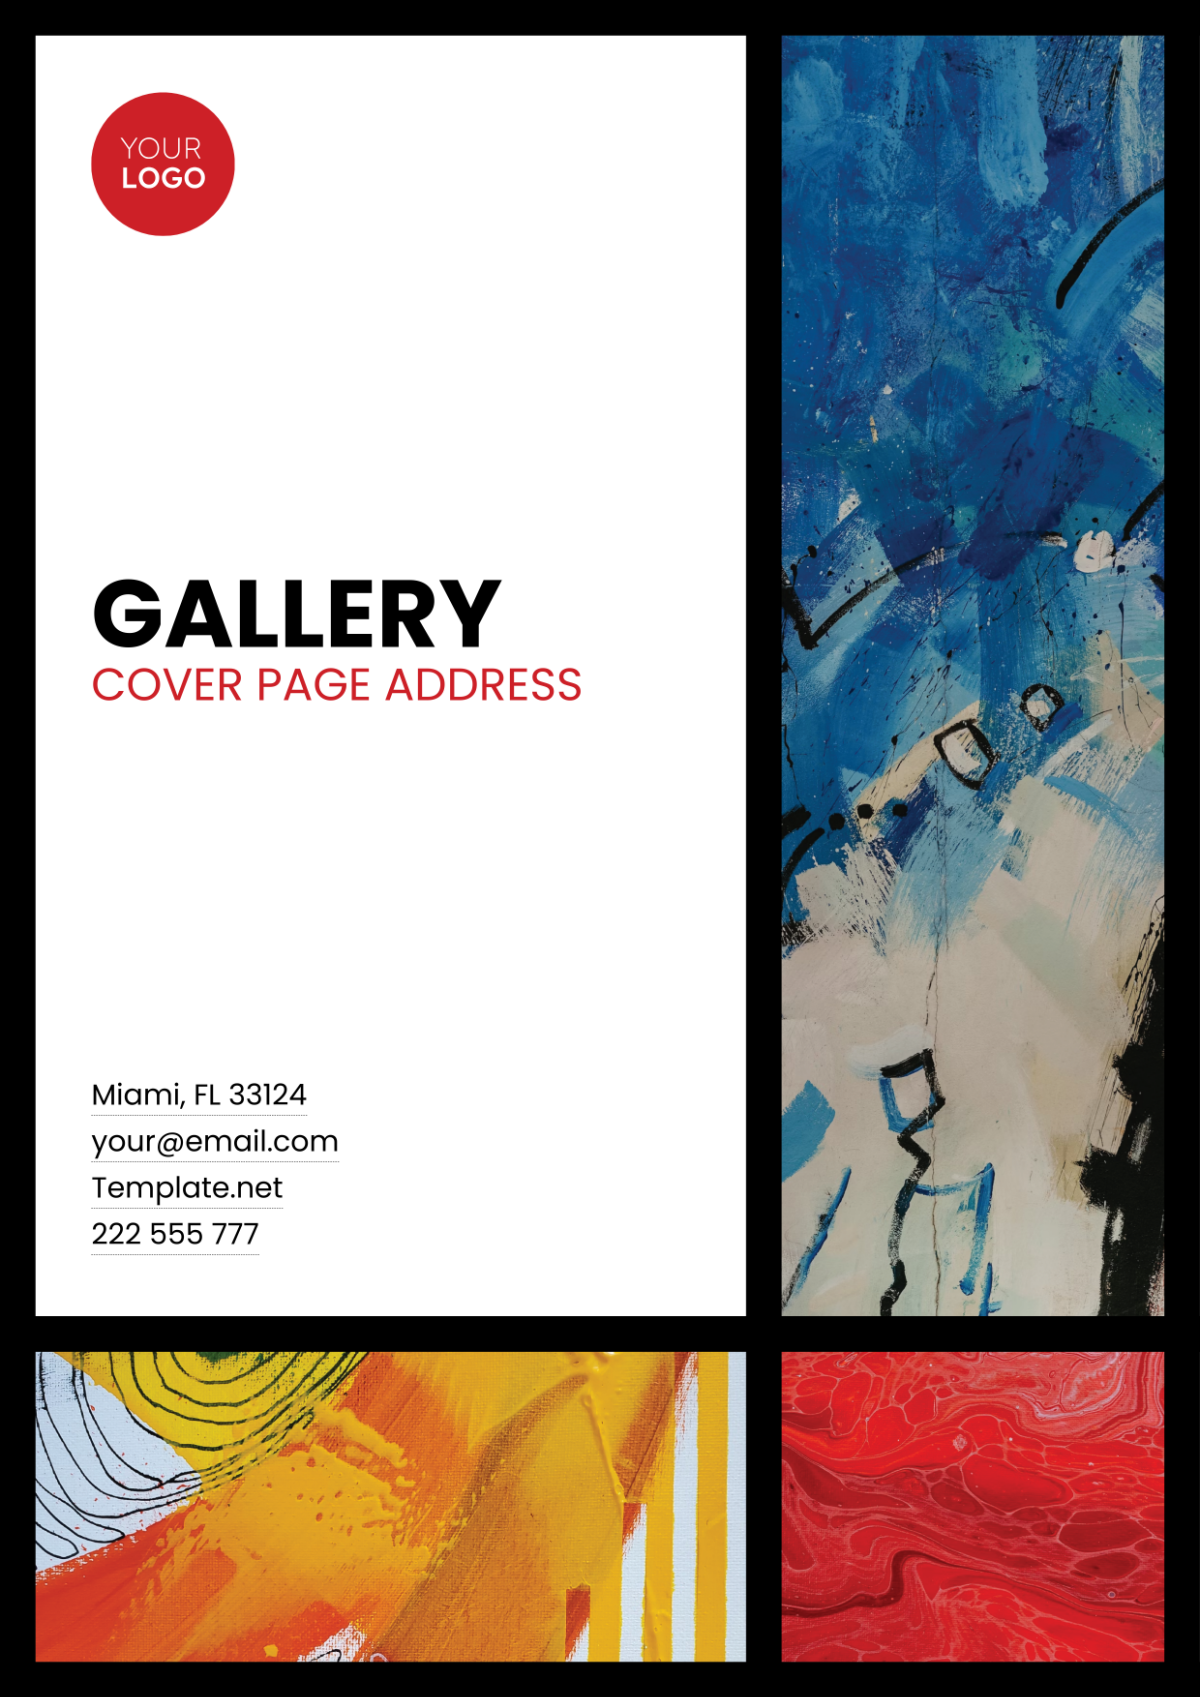 Gallery Cover Page Address